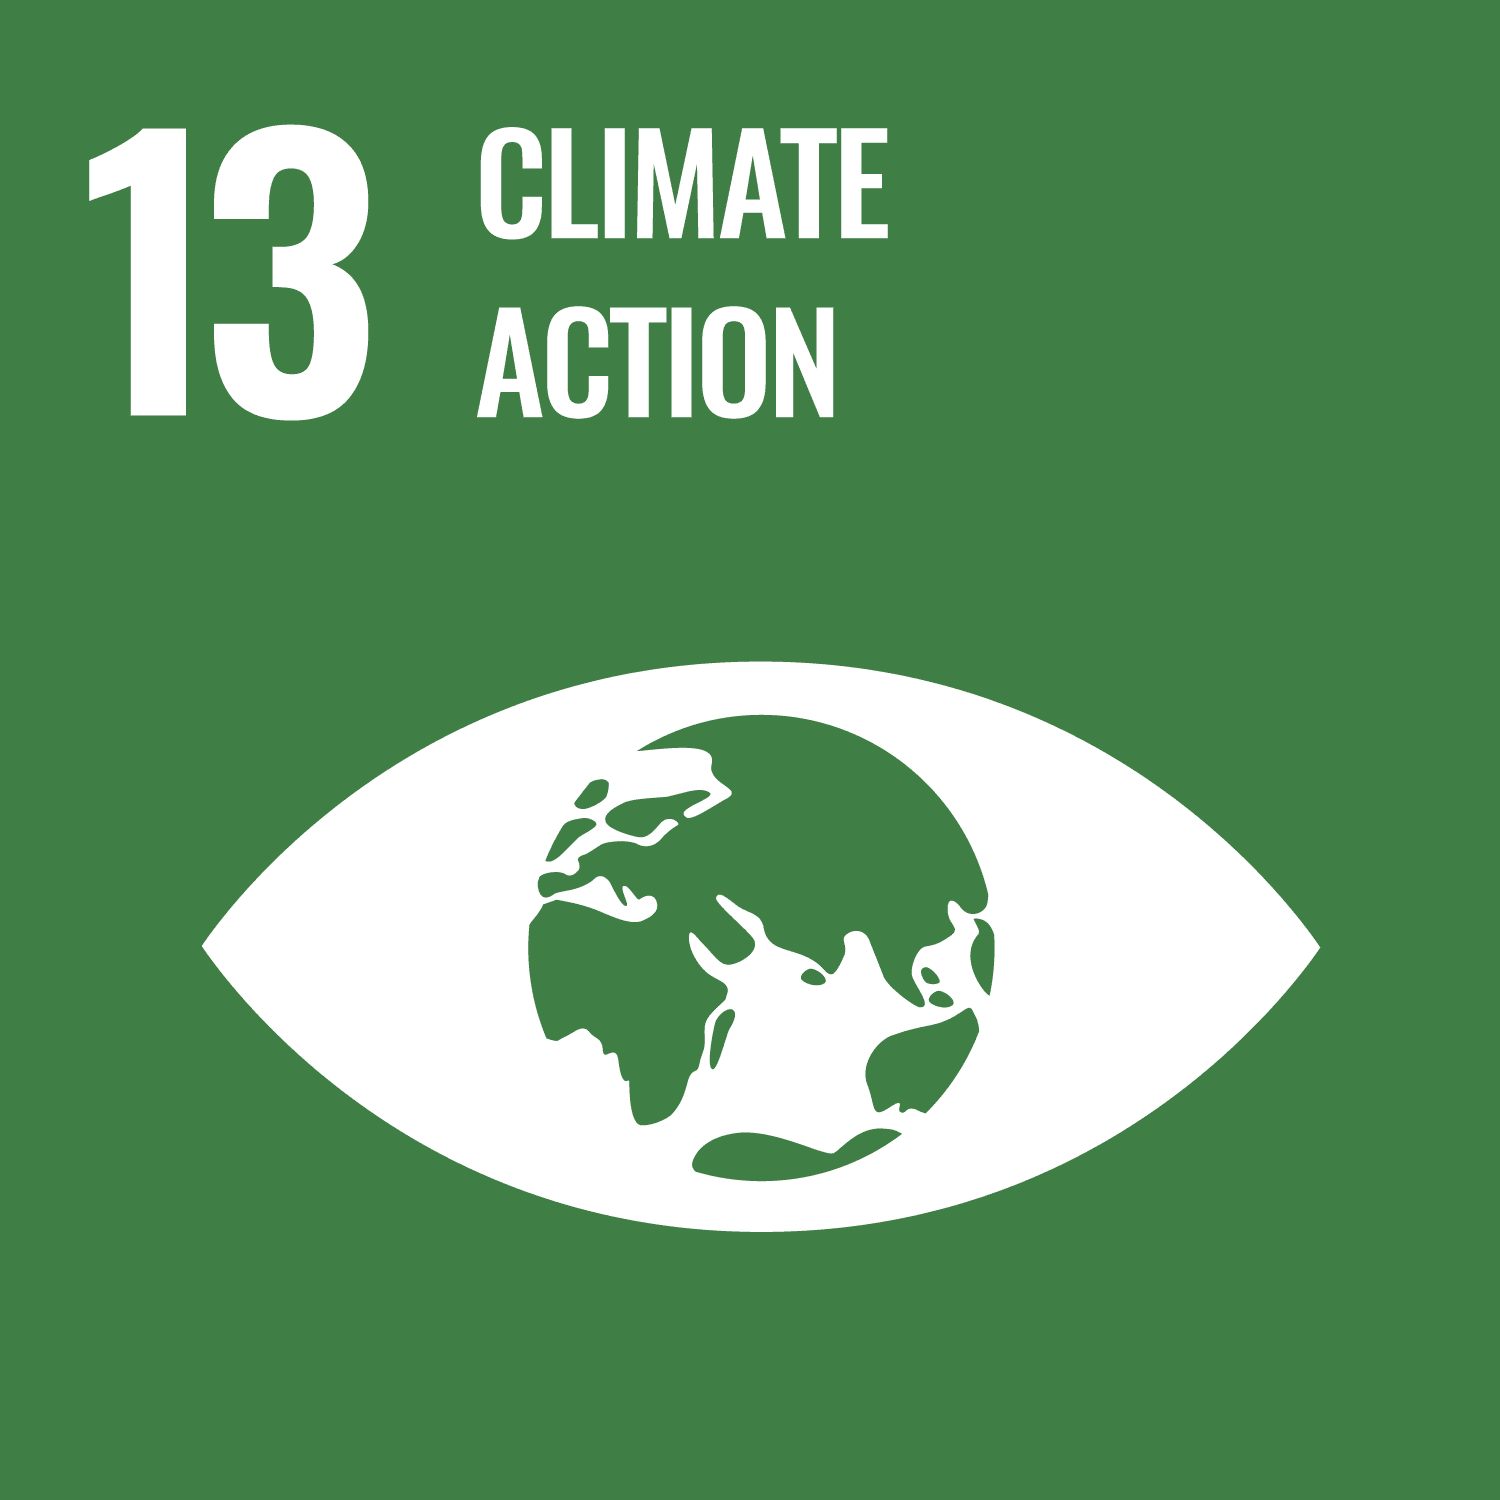 Graphic image of a planet Earth with text saying '13 Climate Action' reflecting Sustainable Development Goal (SDG) or Global Goal 13